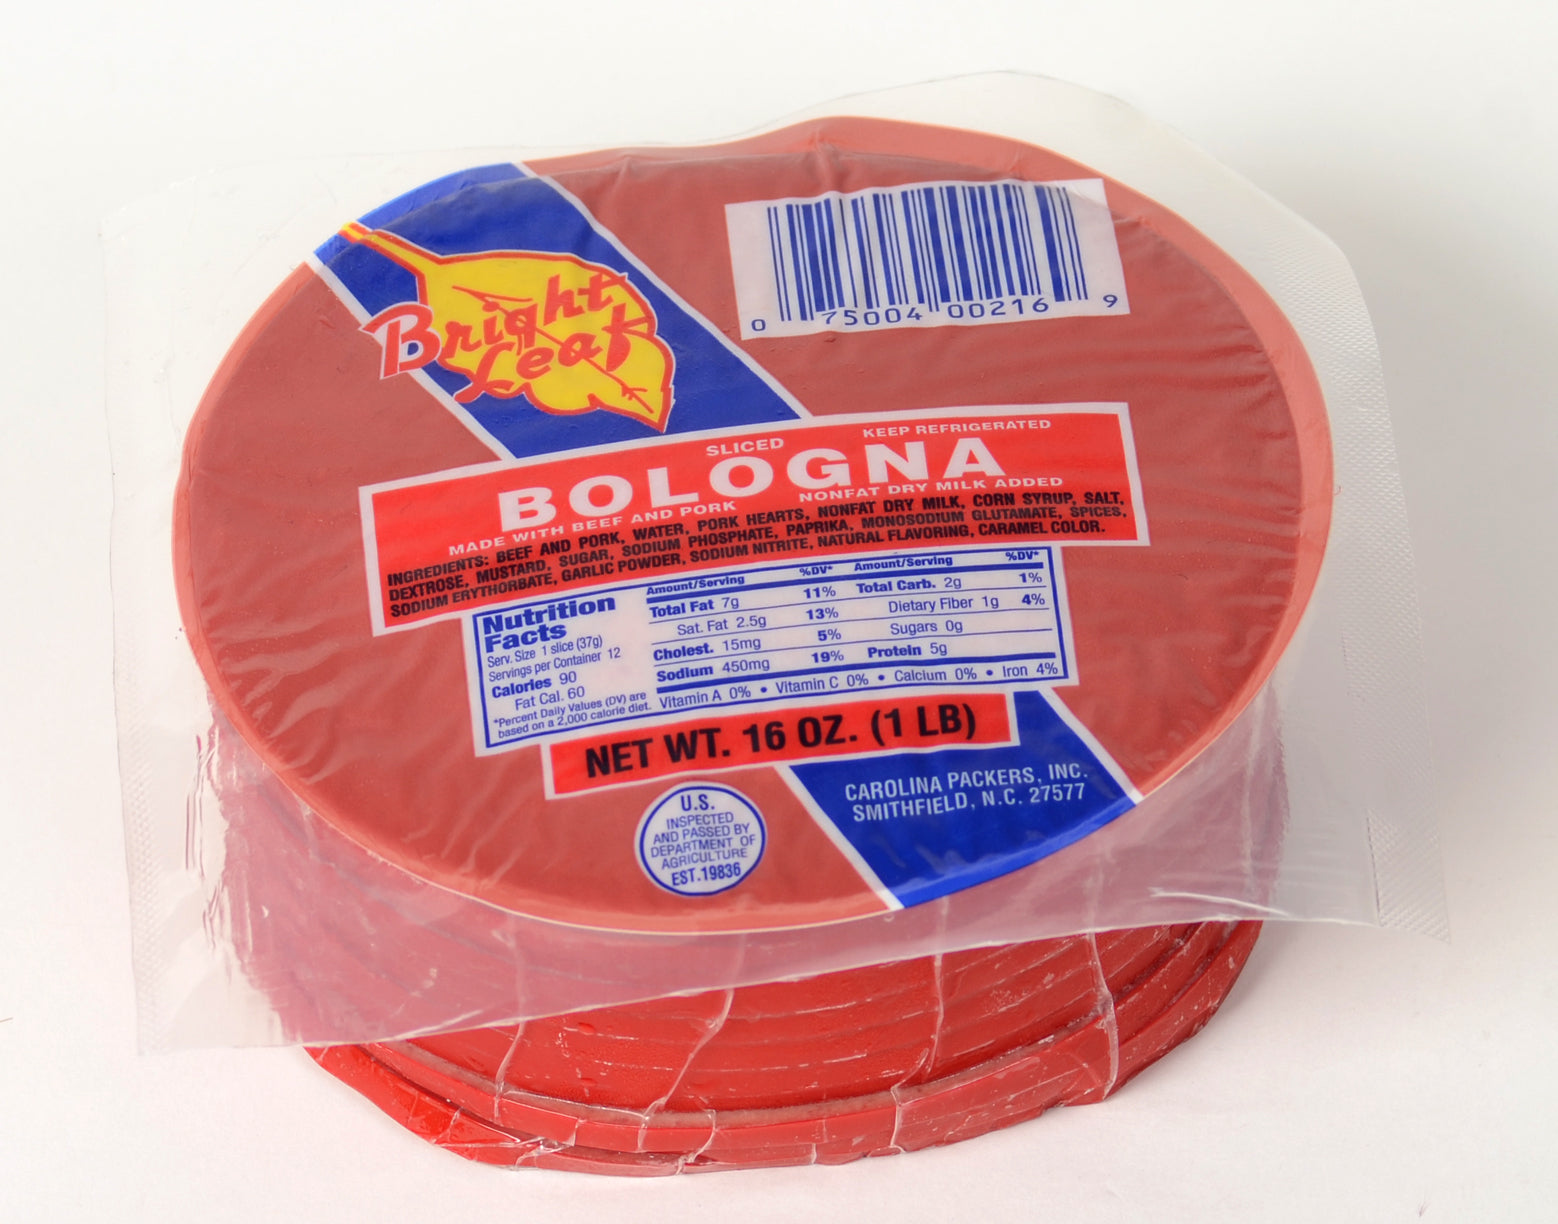 Bright Leaf Bologna (5 -1 lb Packages)